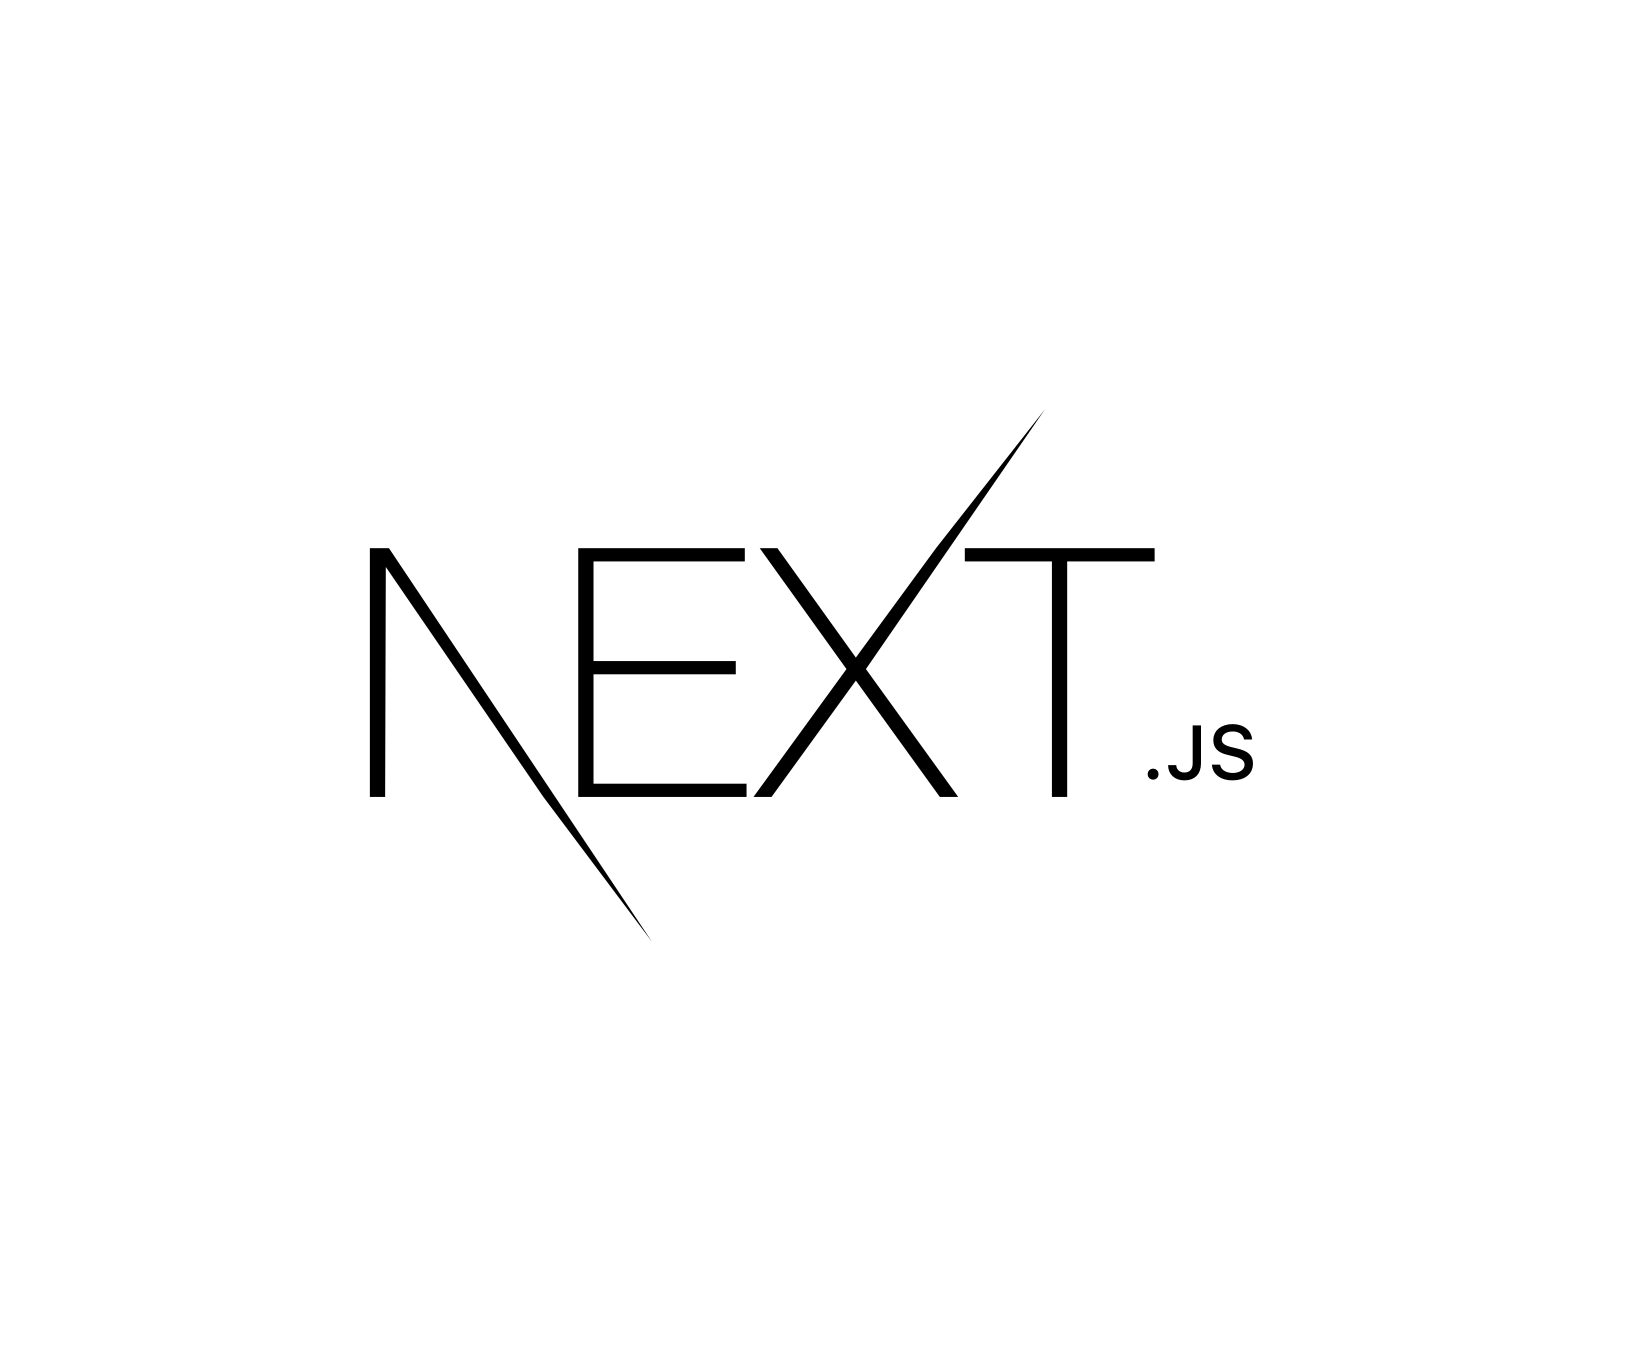 Why you should use the Next.js framework for your front-end developments?